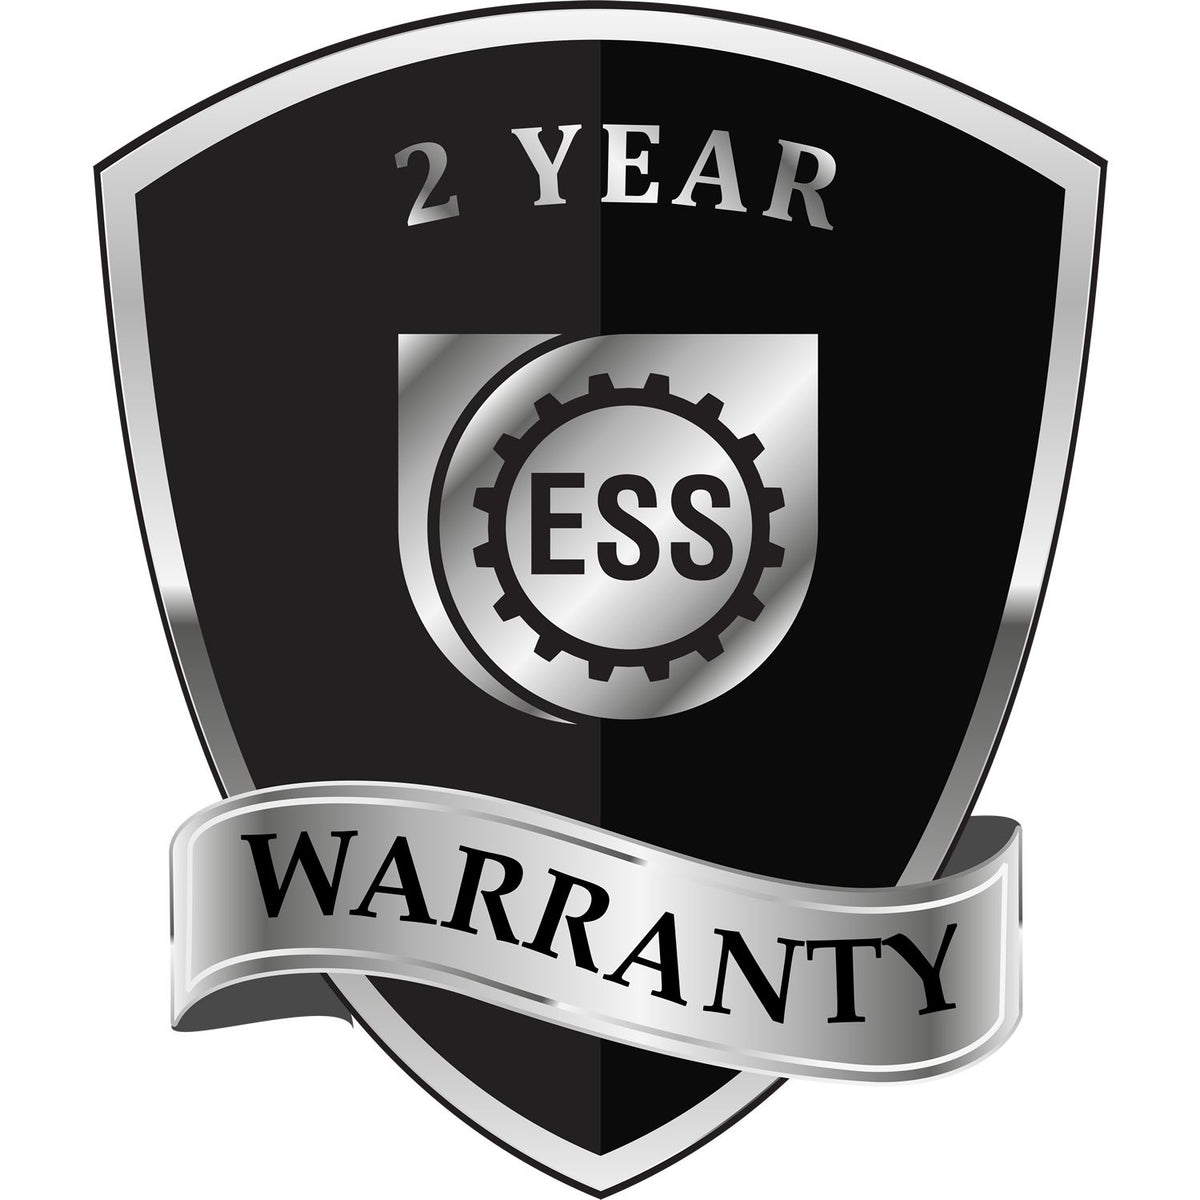 A black and silver badge or emblem showing warranty information for the Hybrid Texas Architect Seal